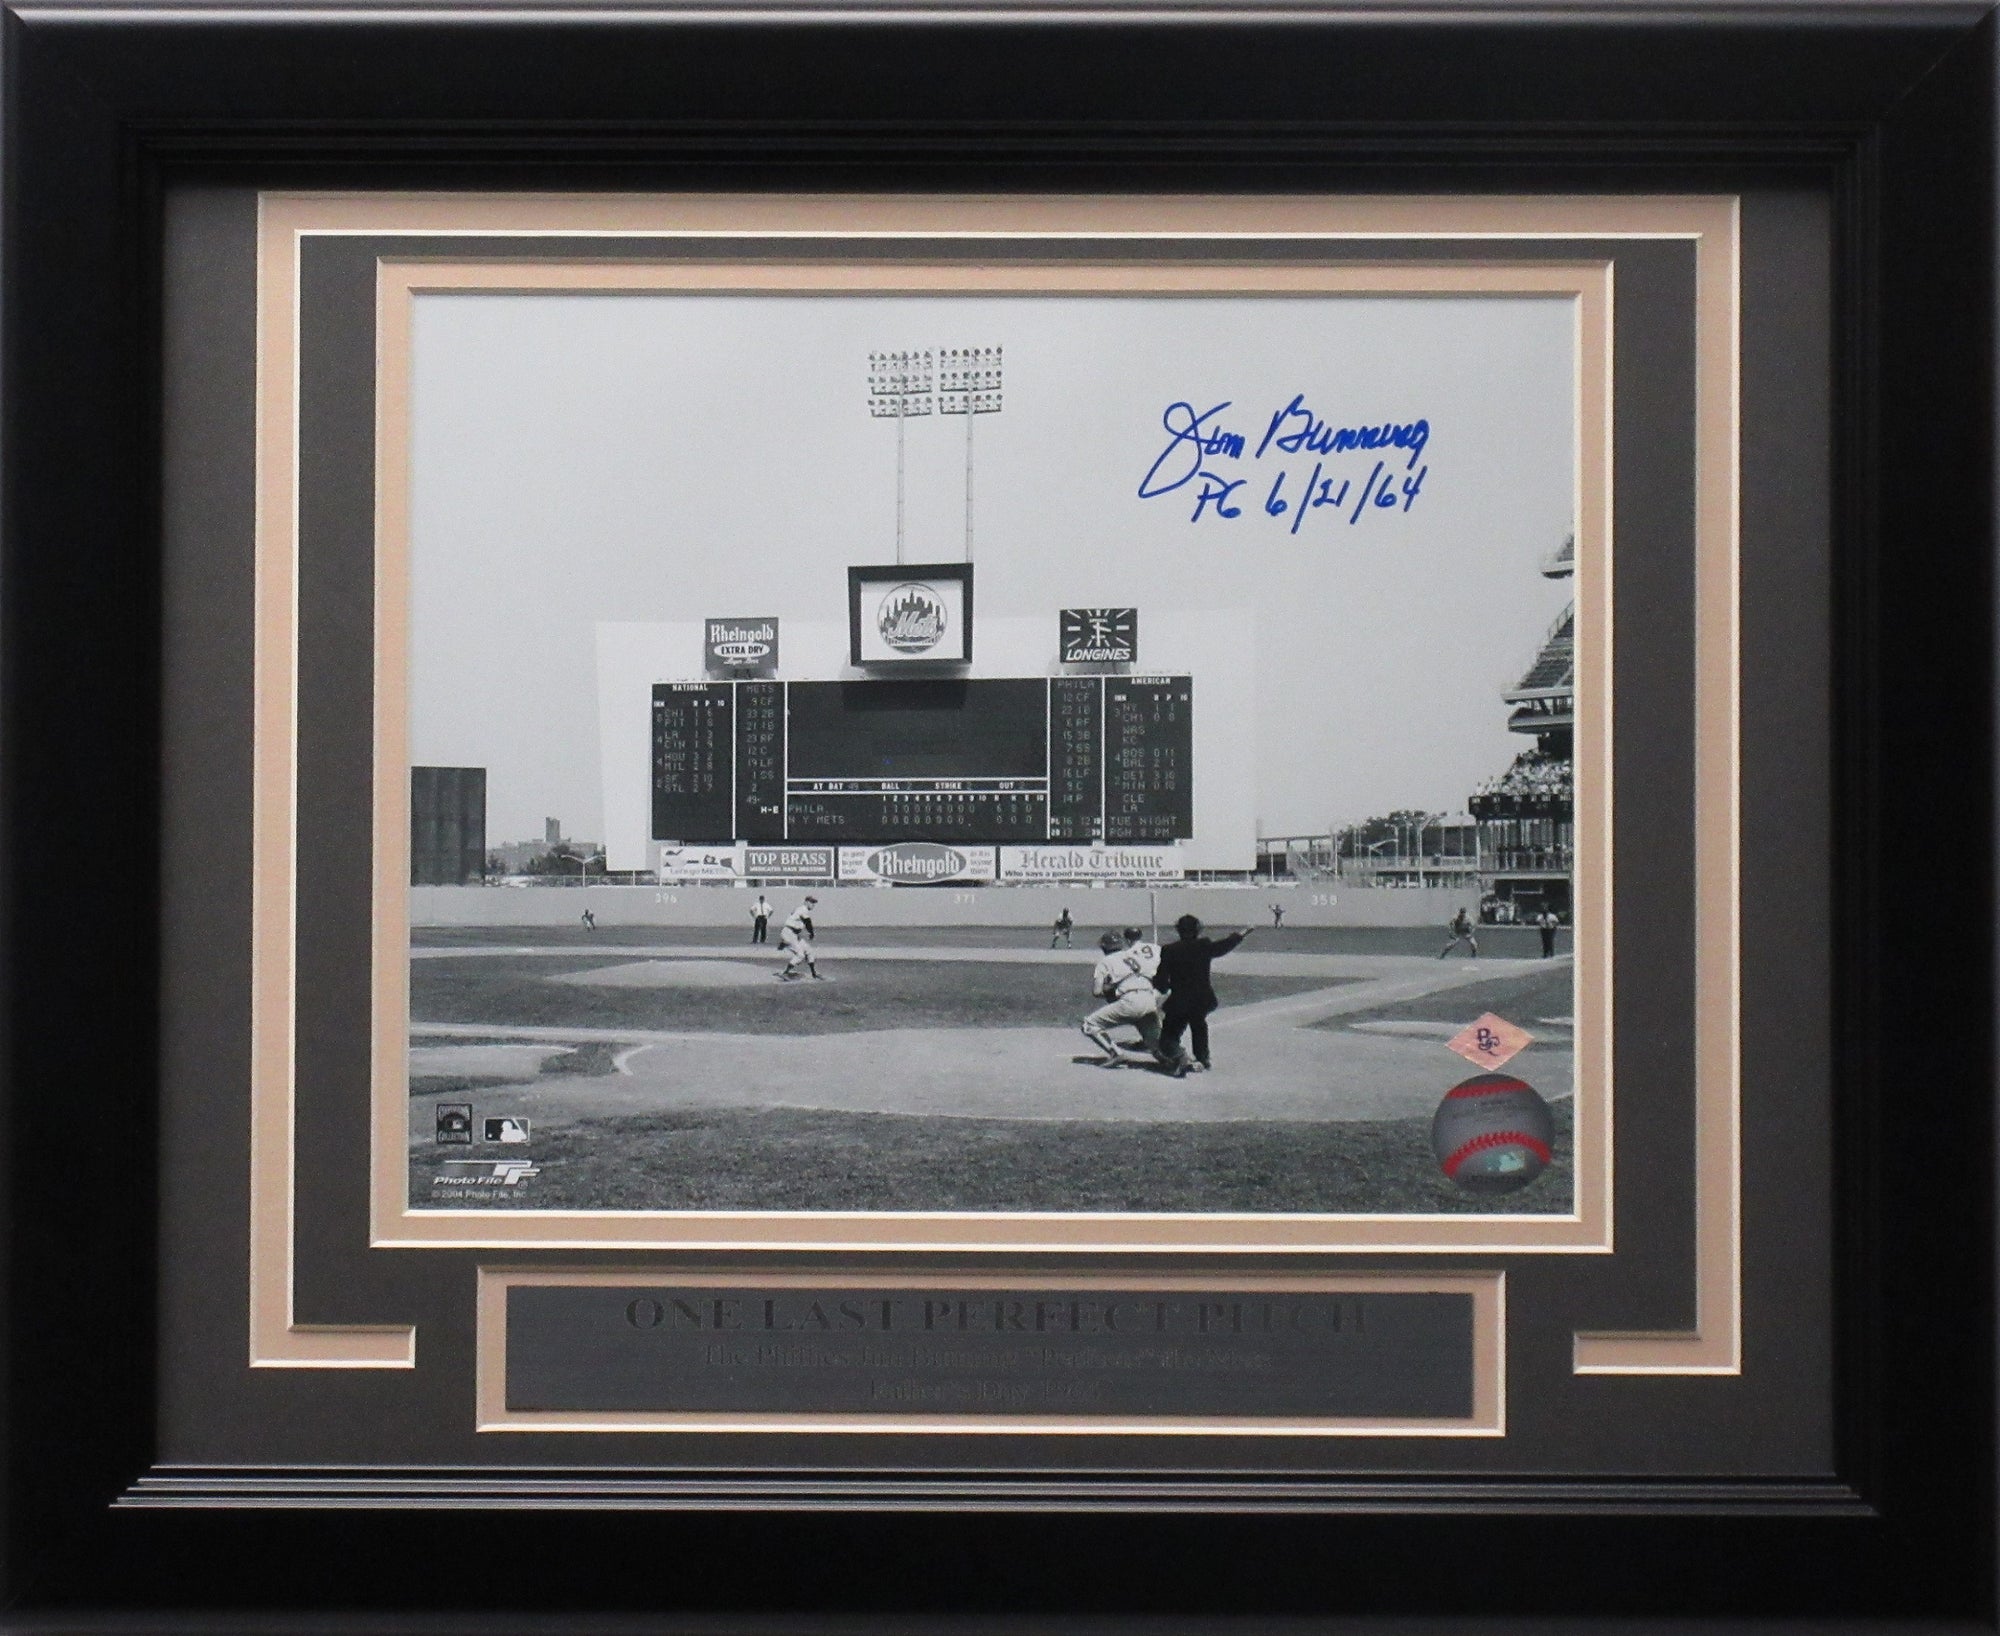 Jim Bunning Autographed 8x10 "Fathers Day Perfect Game" Photo Framed